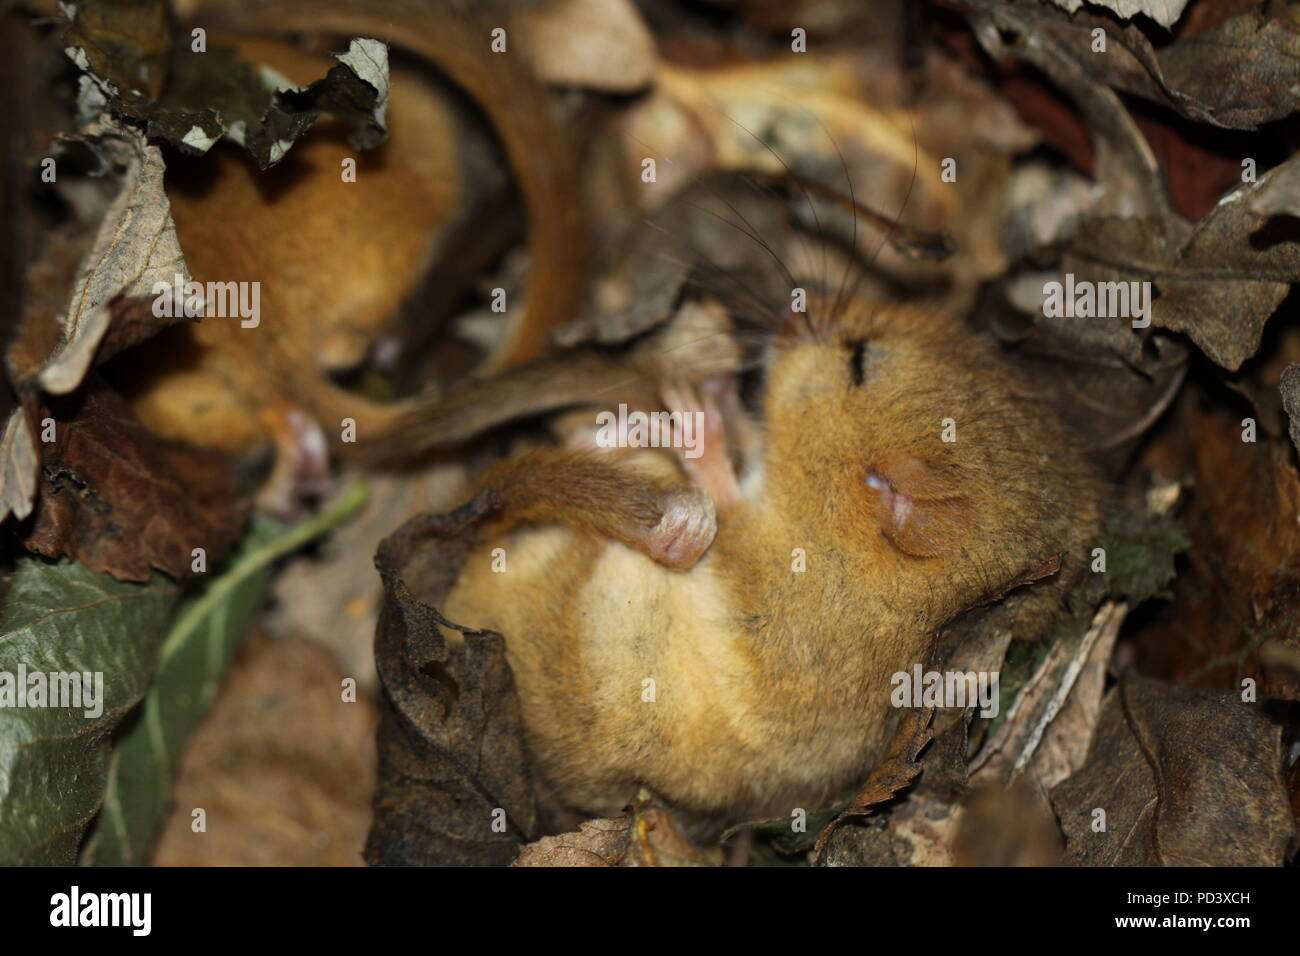 Two Hazel Dormice (Muscardinus avellanarius) asleep in torpor in their nest. Photographed in Hampshire in the UK in 2011. Stock Photo